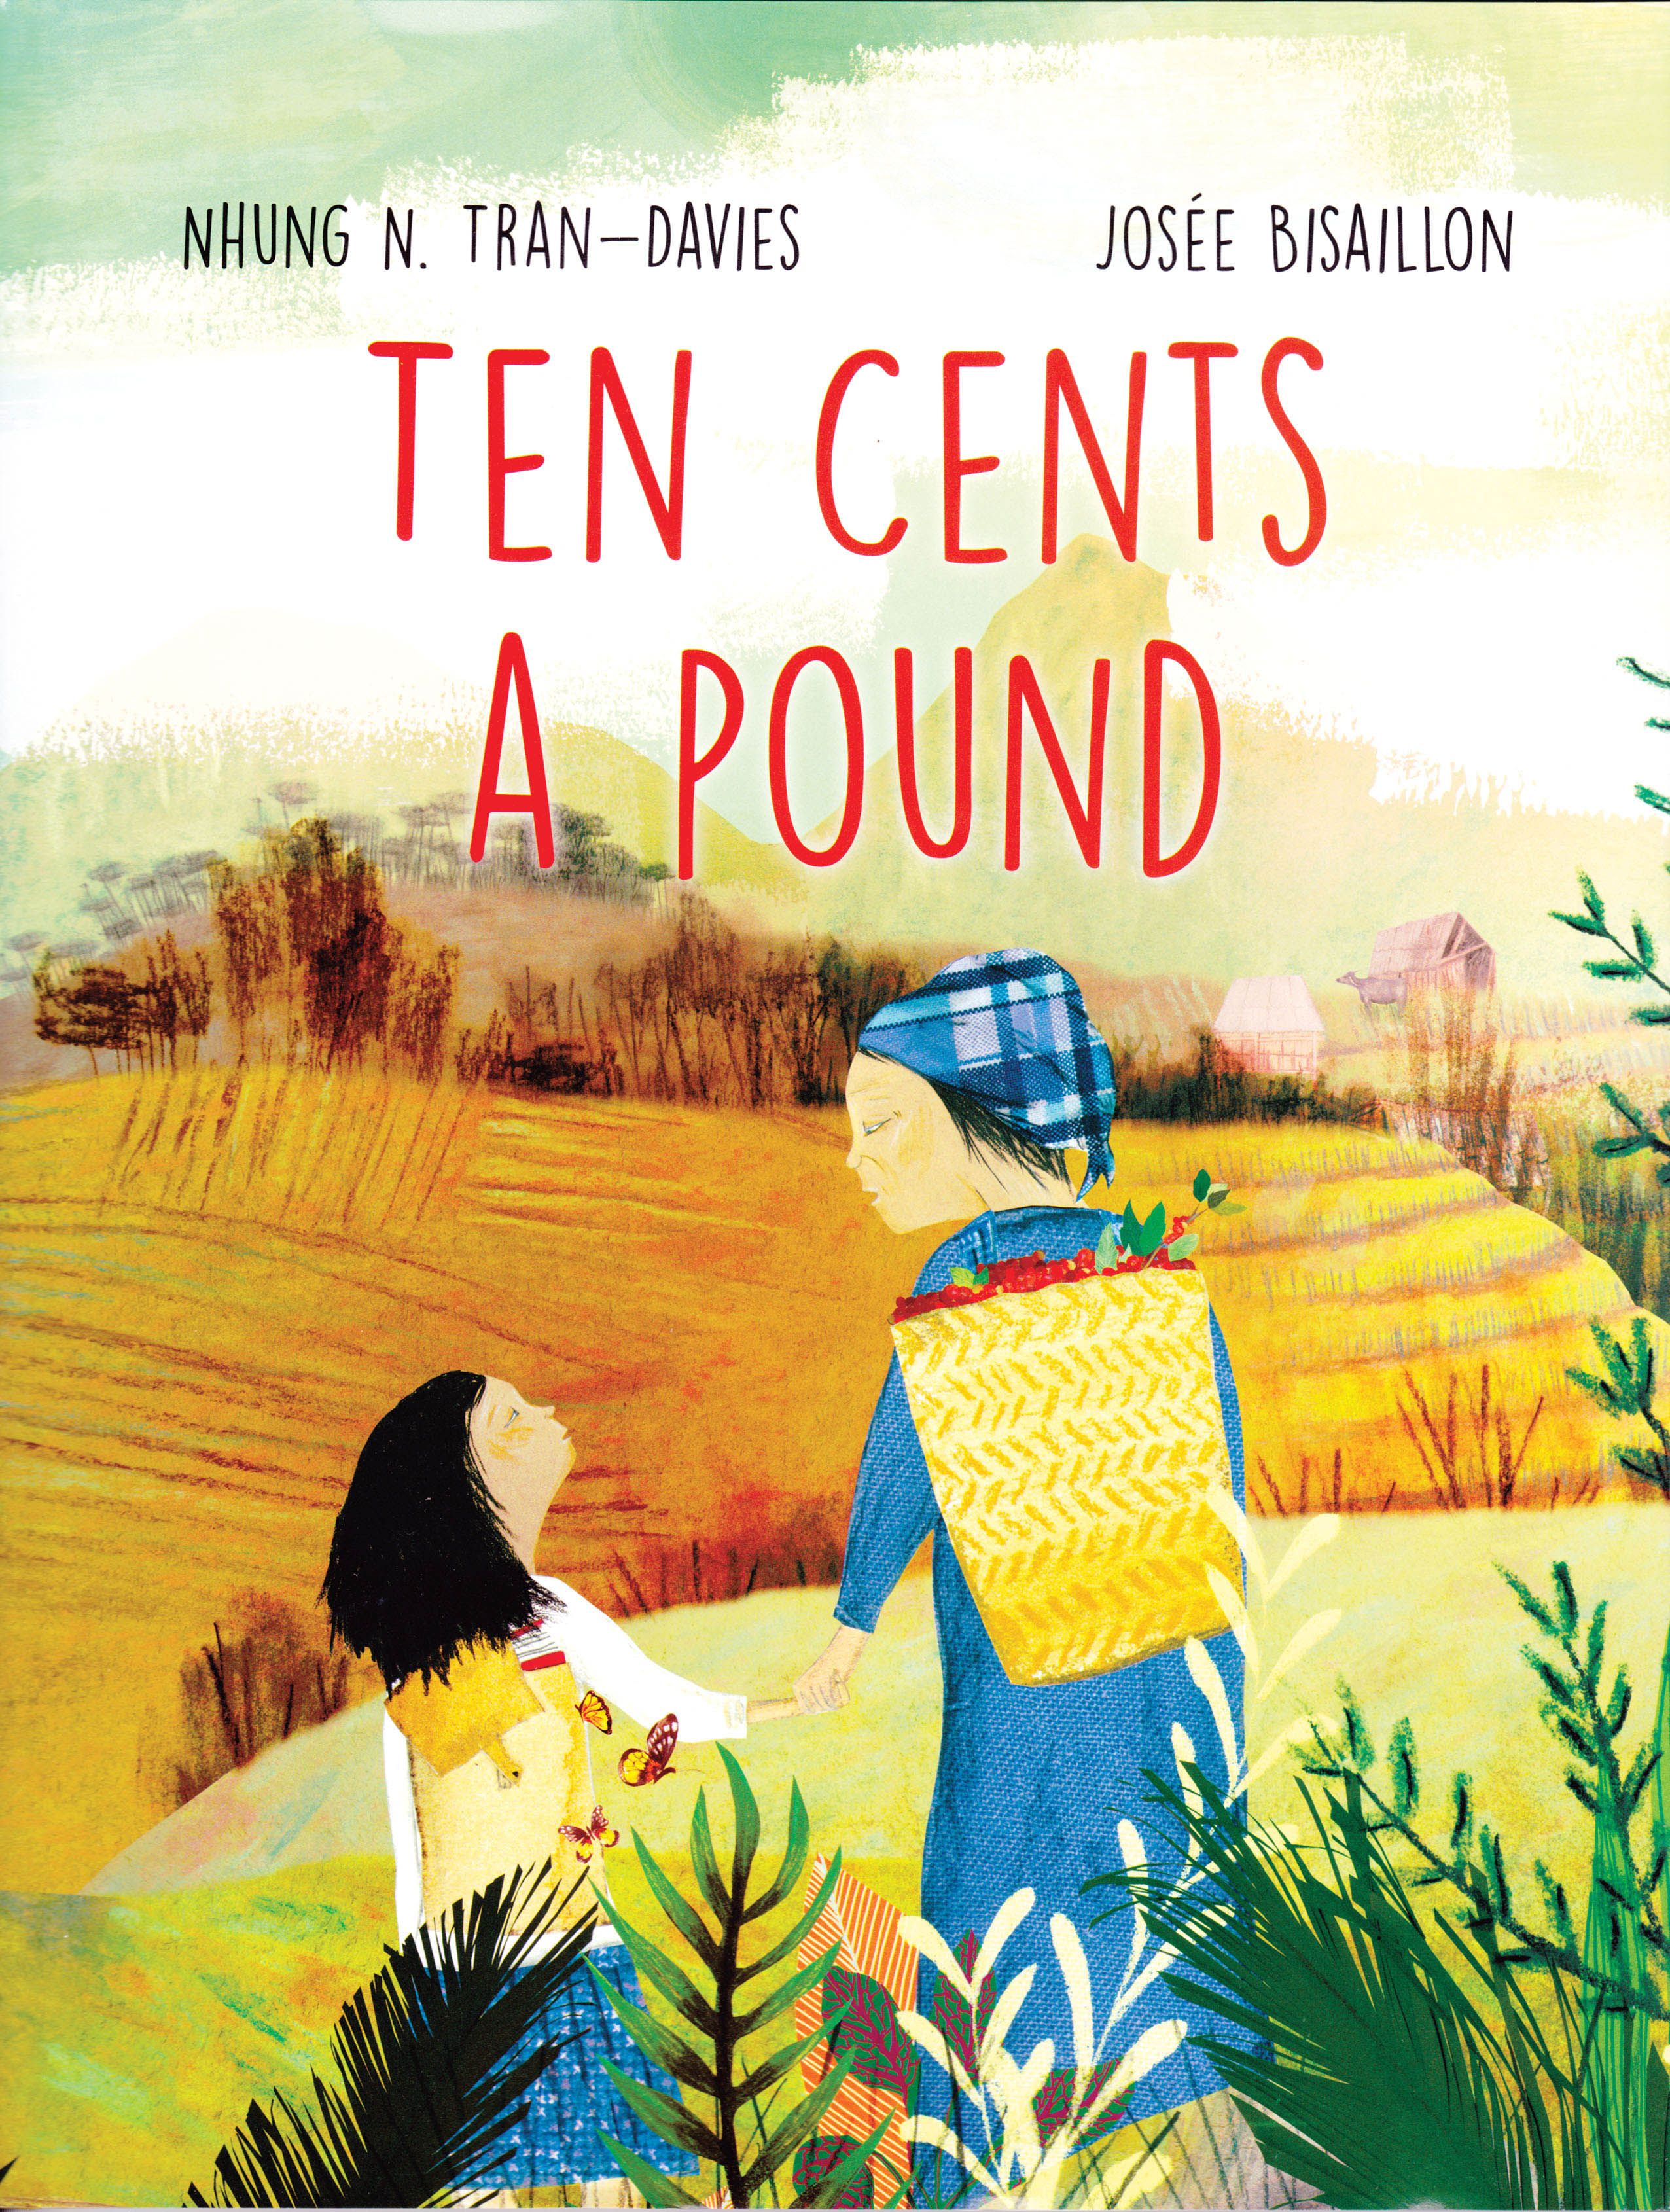 Book cover of ‘Ten Cents a Pound’.